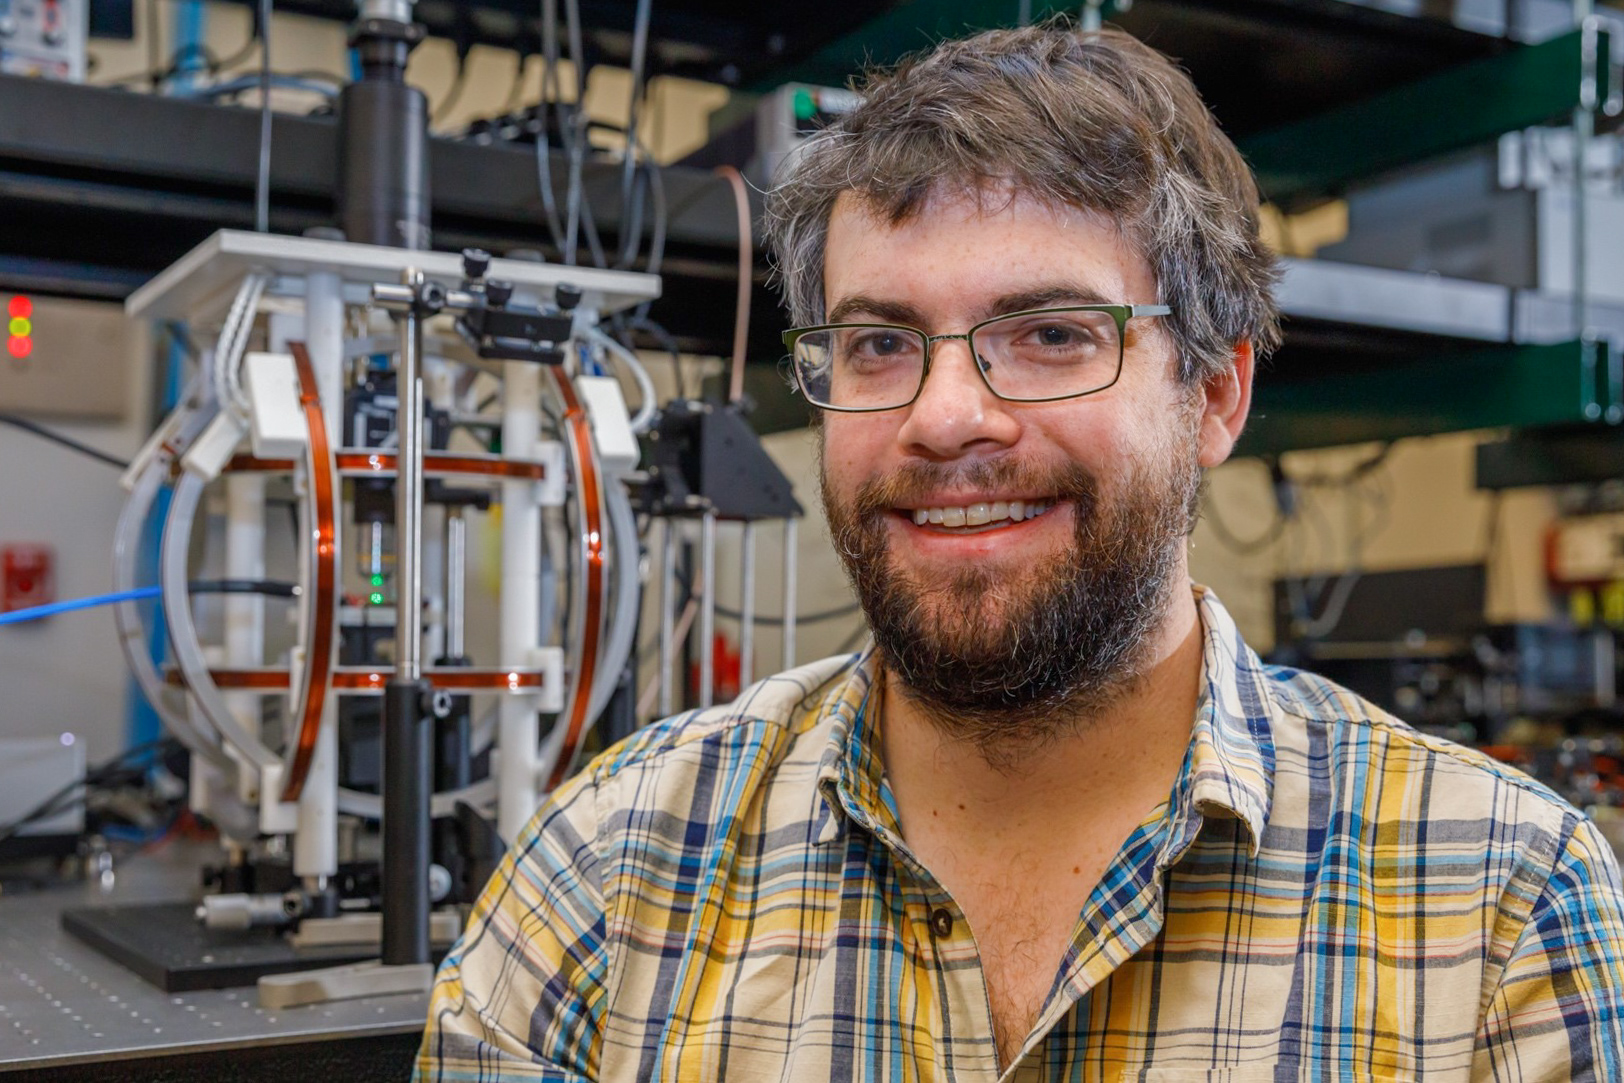 Sandia National Laboratories’ Andy Mounce makes microscopic sensors to try to understand quantum materials at the Center for Integrated Nanotechnologies. He is one of four employees to earn DOE’s Early Career Research Award. (Photo by Bret Latter